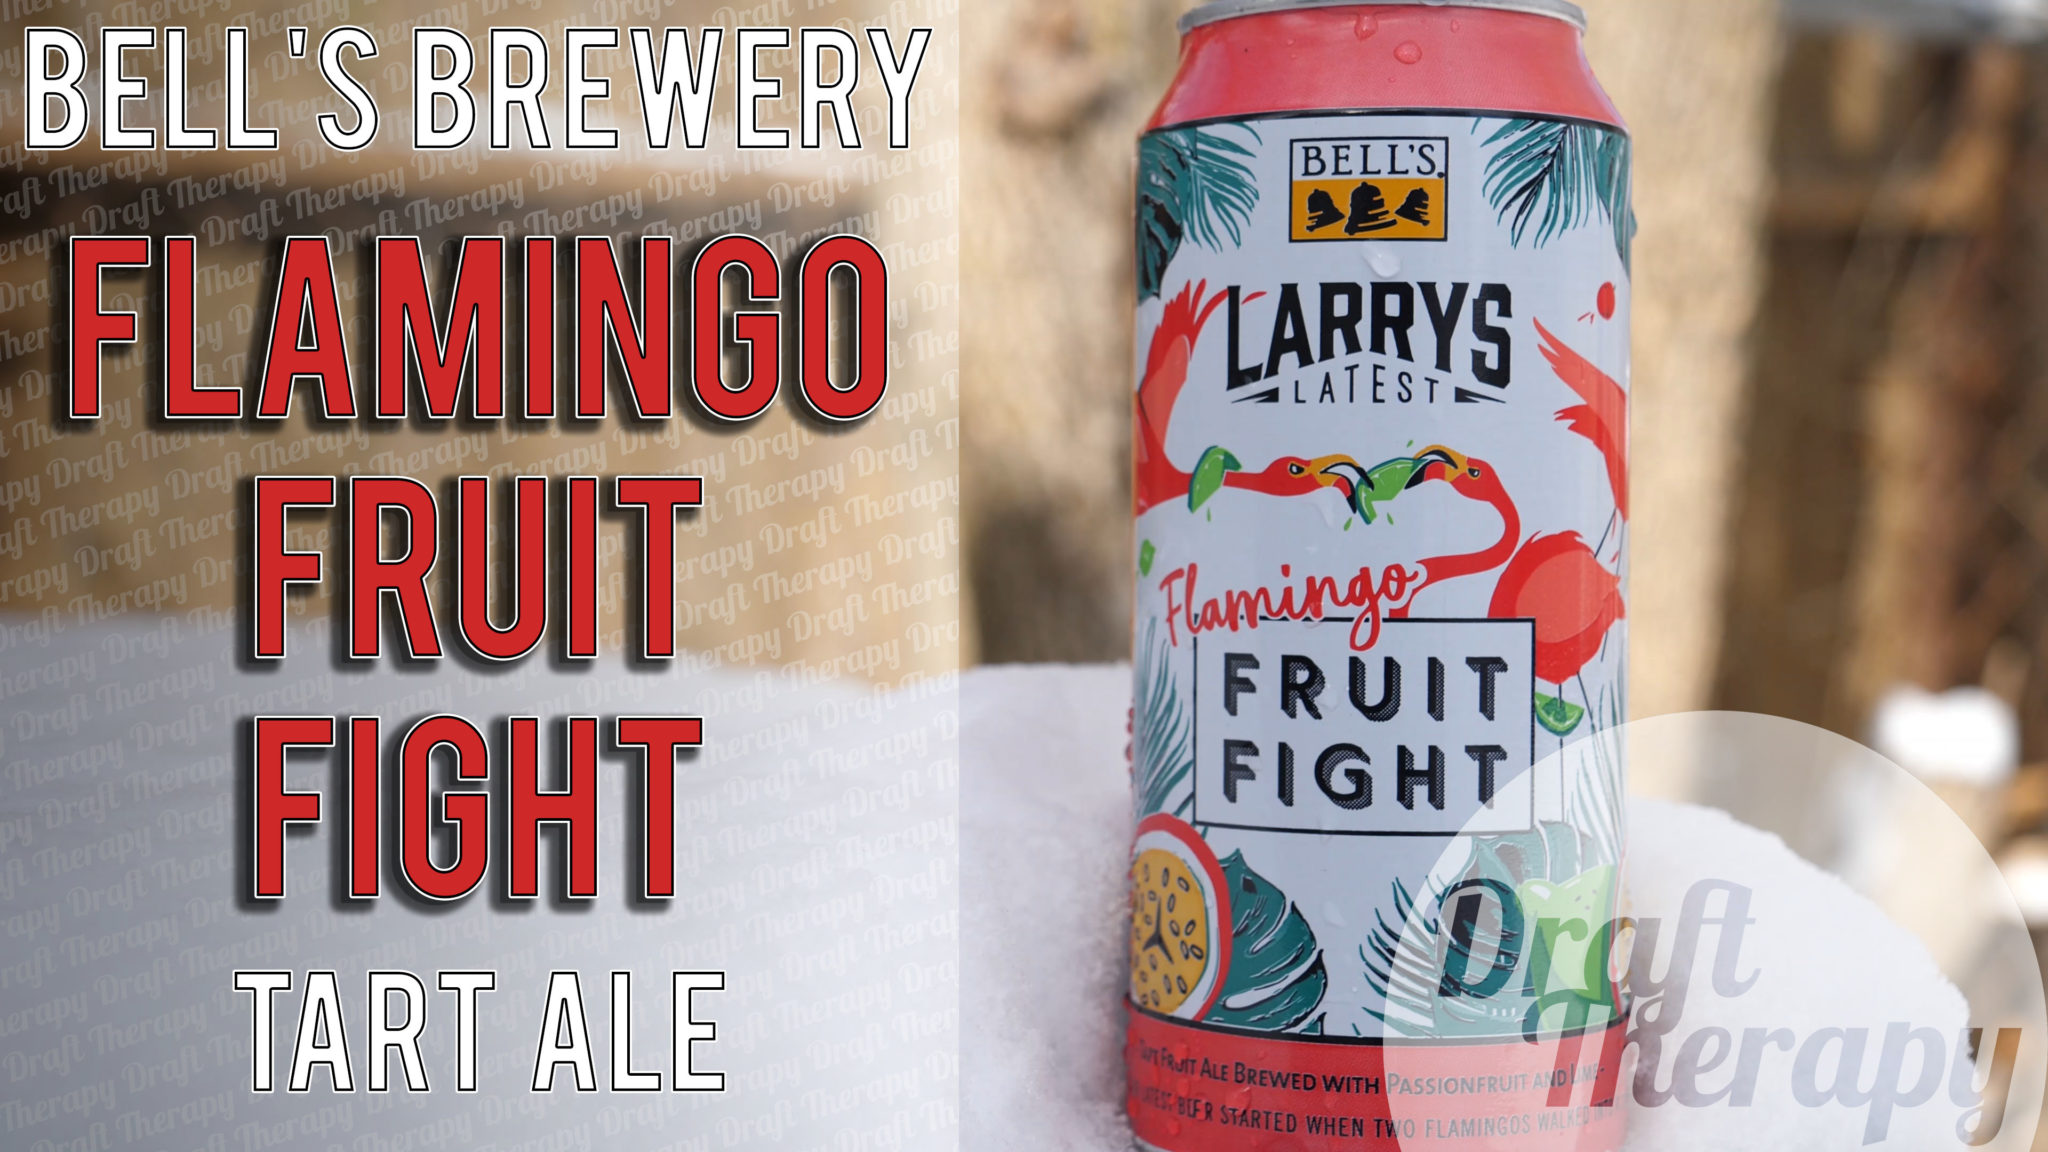 You are currently viewing Bell’s Brewery – Larry’s Latest – Flamingo Fruit Fight